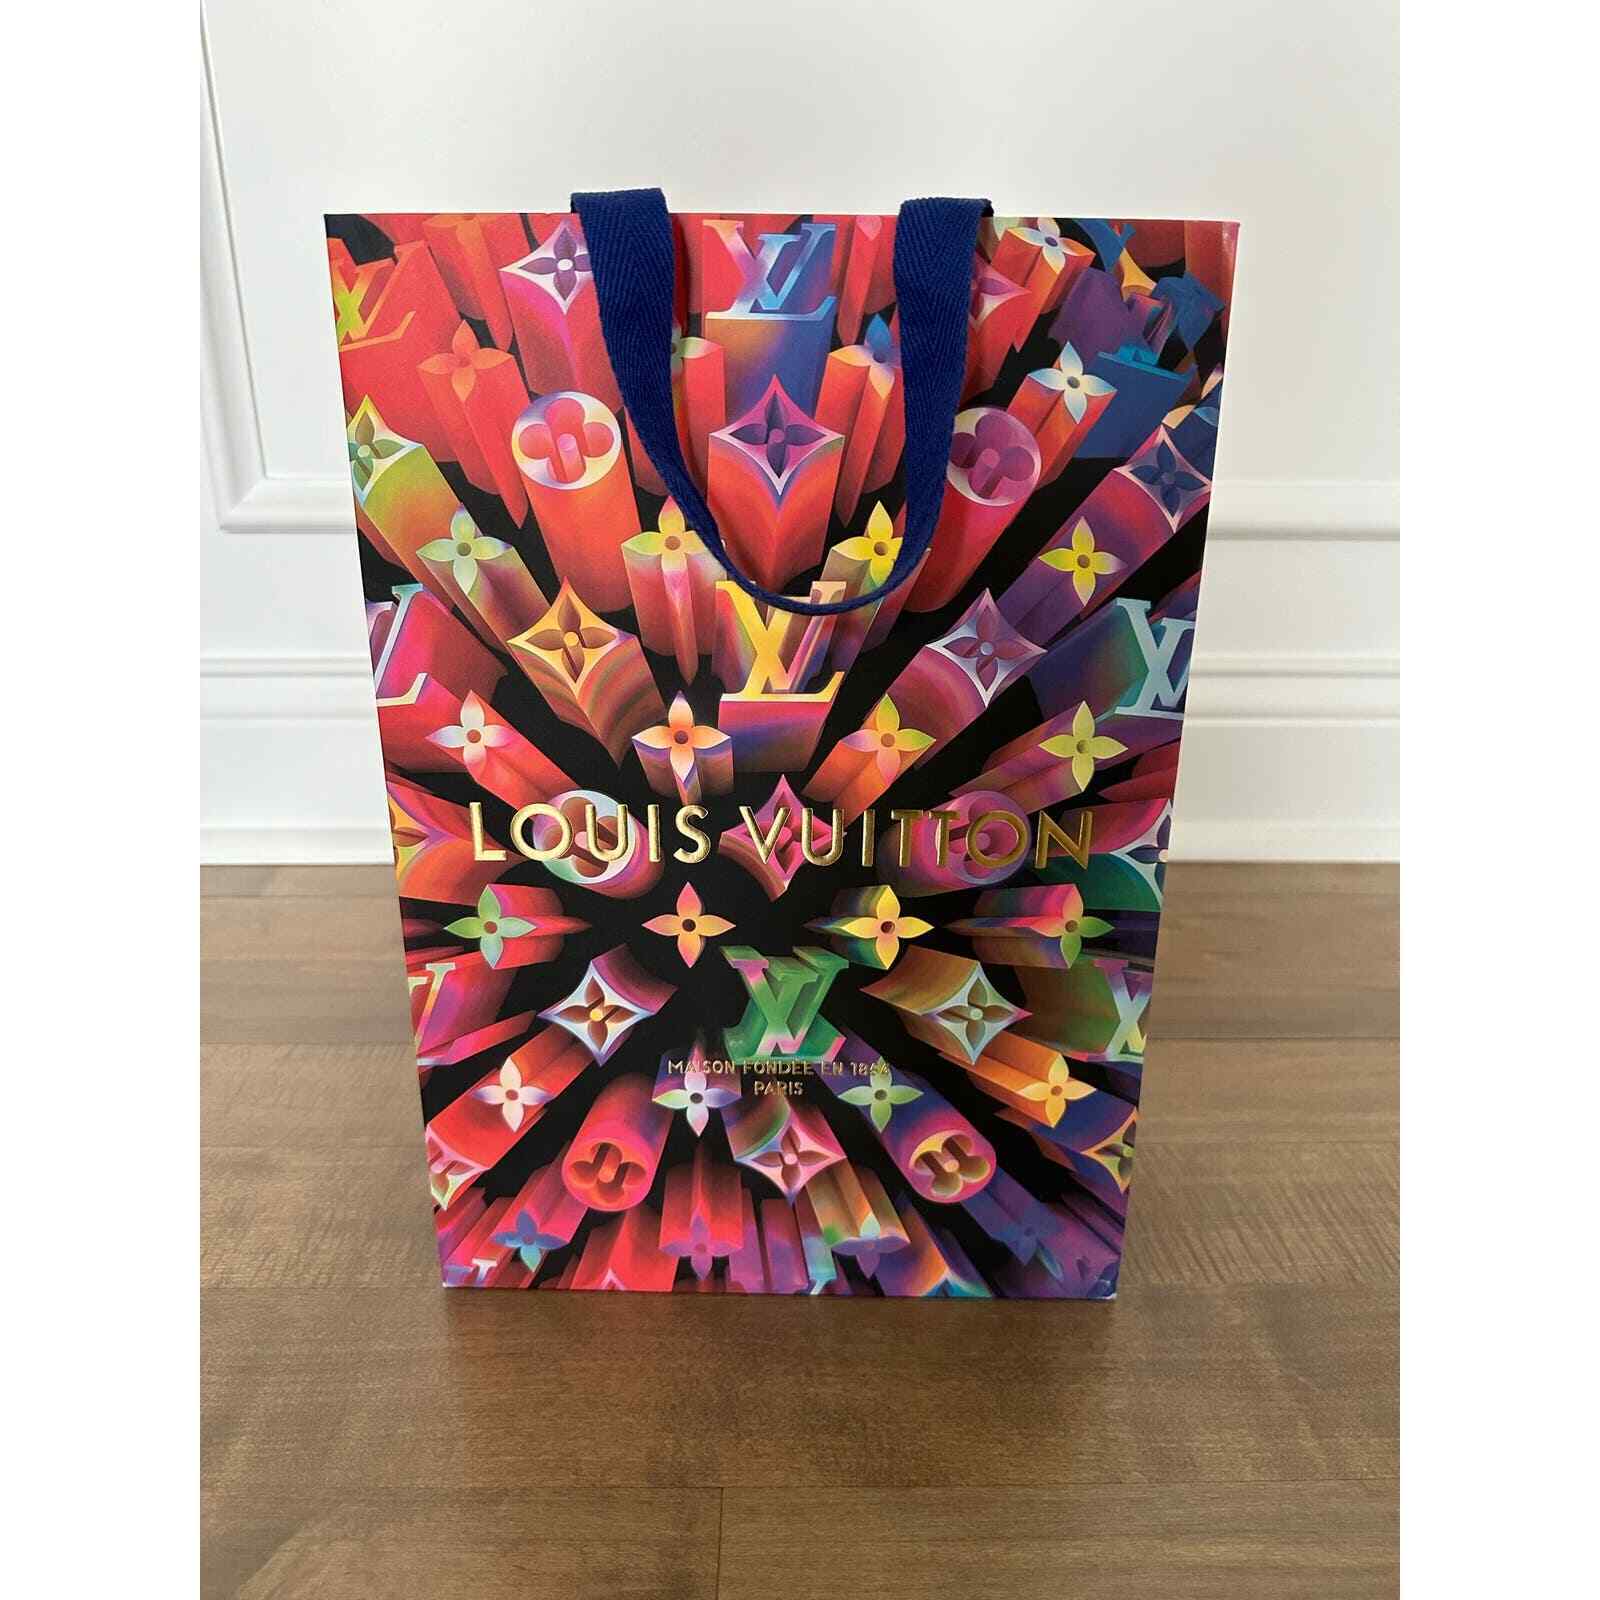 Louis Vuitton Authentic 2019 Limited Edition Holiday Shopping Bag